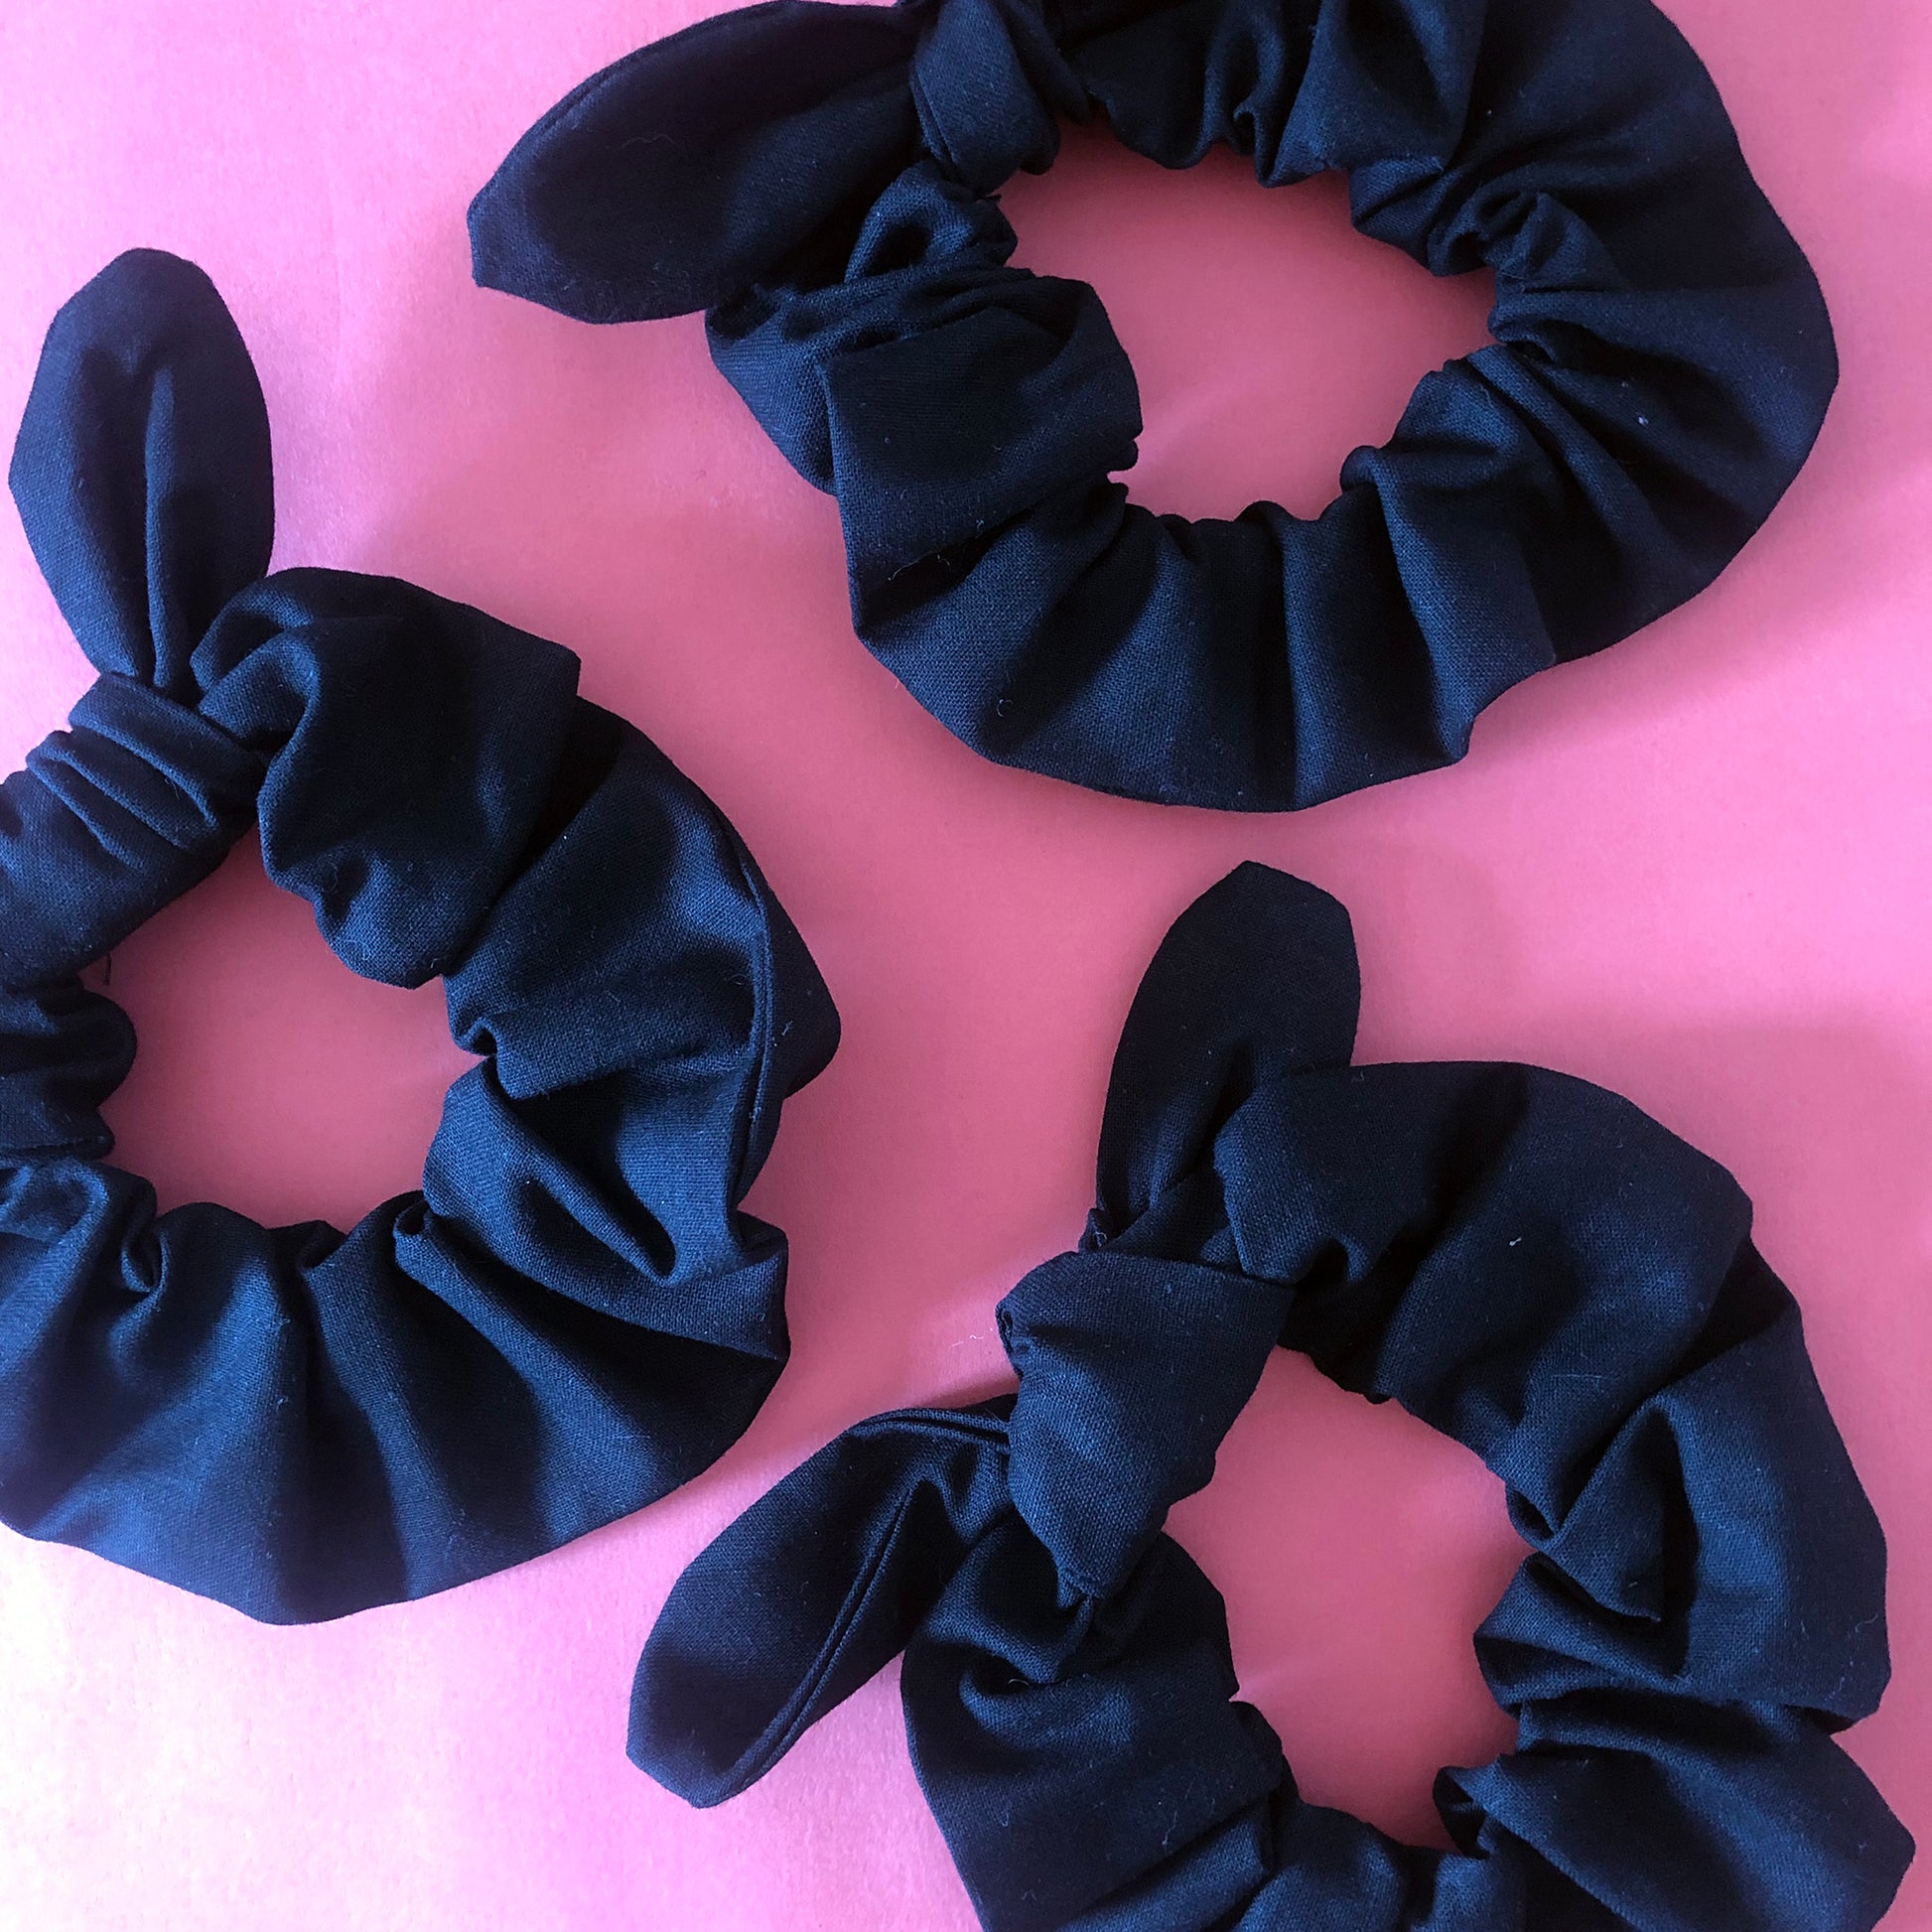 Image shows a black cotton hair scrunchie with a knot and bow